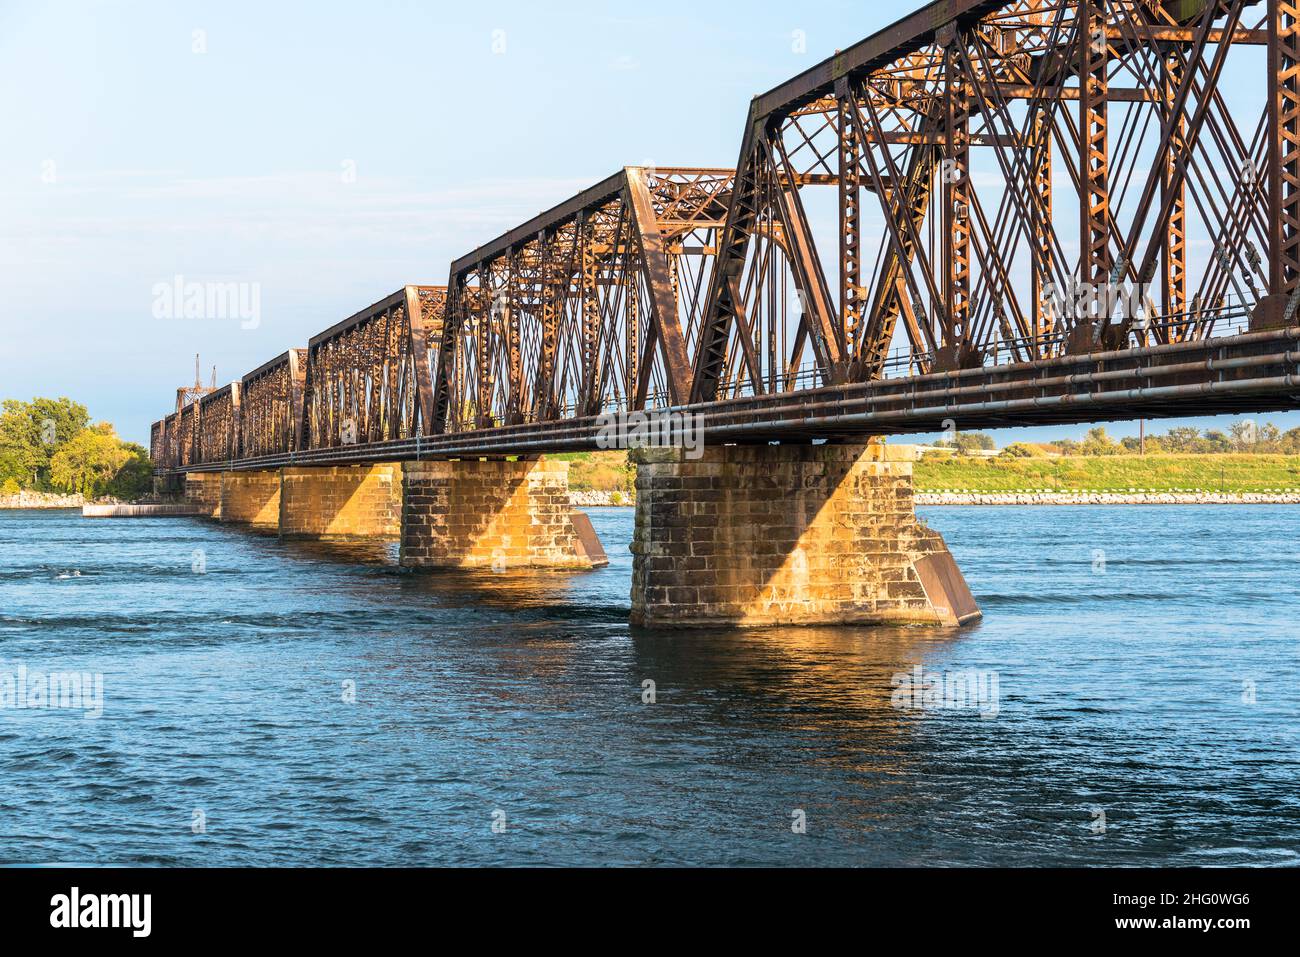 View of an empty rusty railroad bridge across a river at sunset Stock Photo